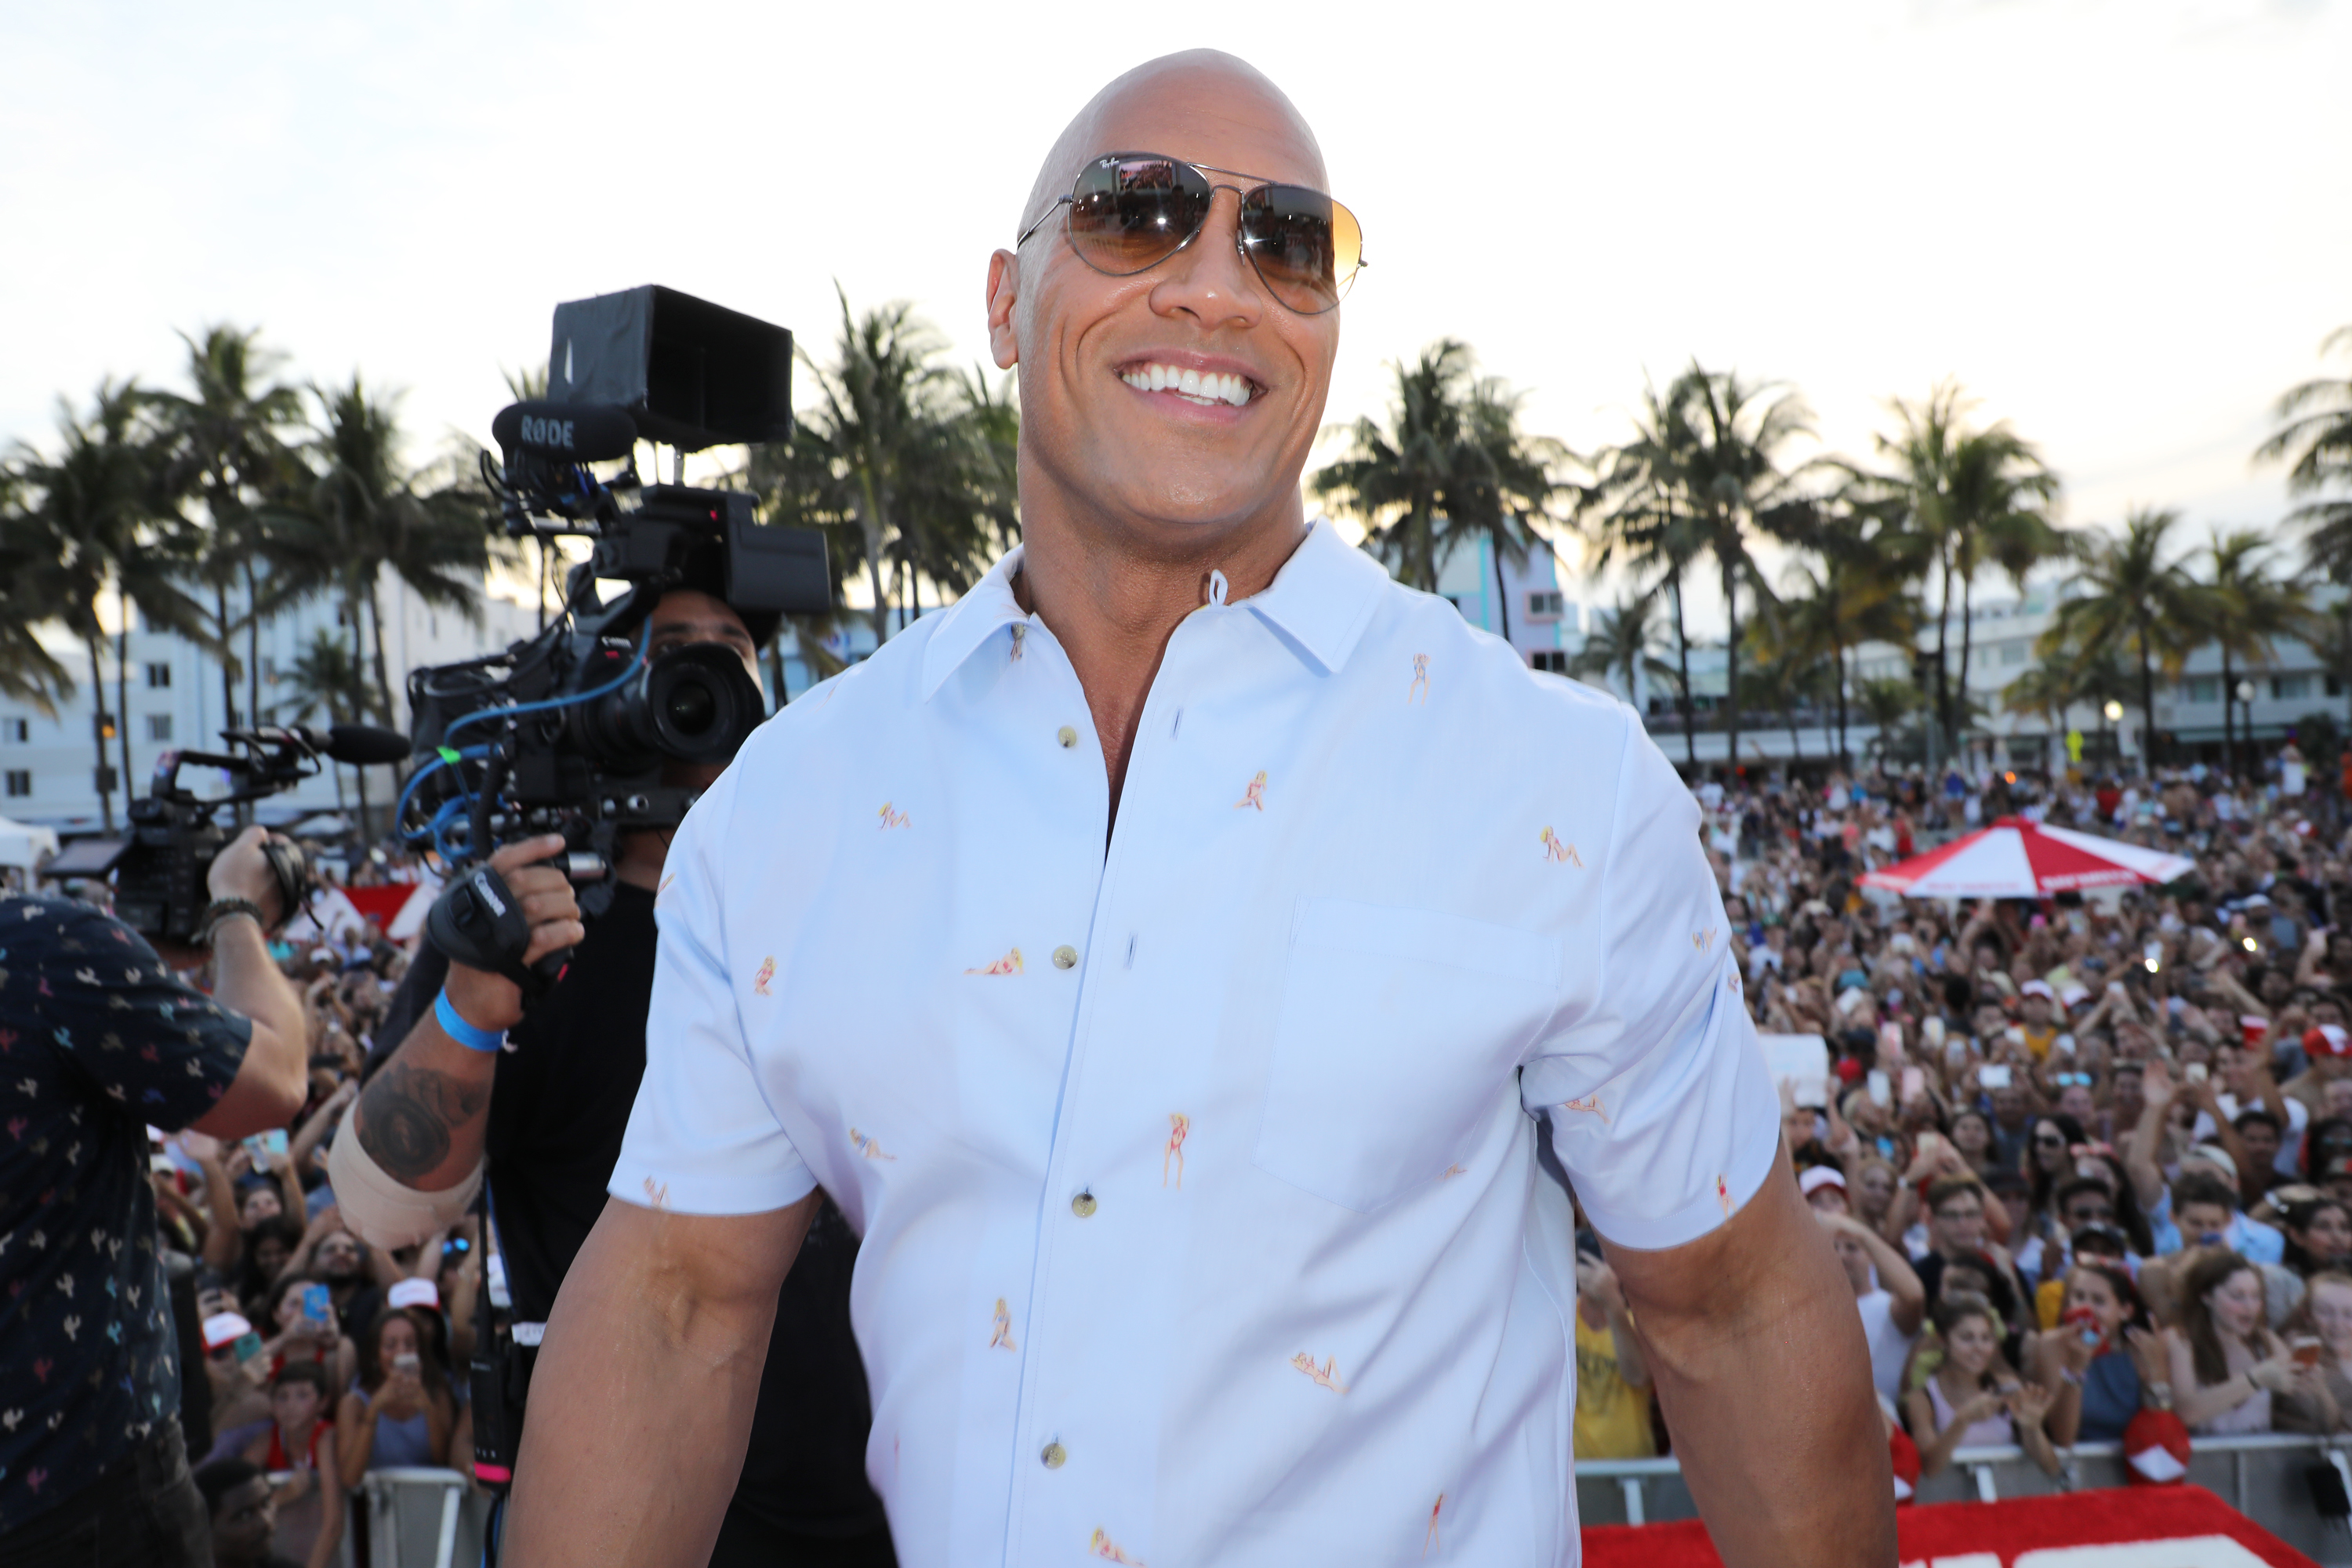 Dwayne 'The Rock' Johnson reveals what was in his fanny pack in